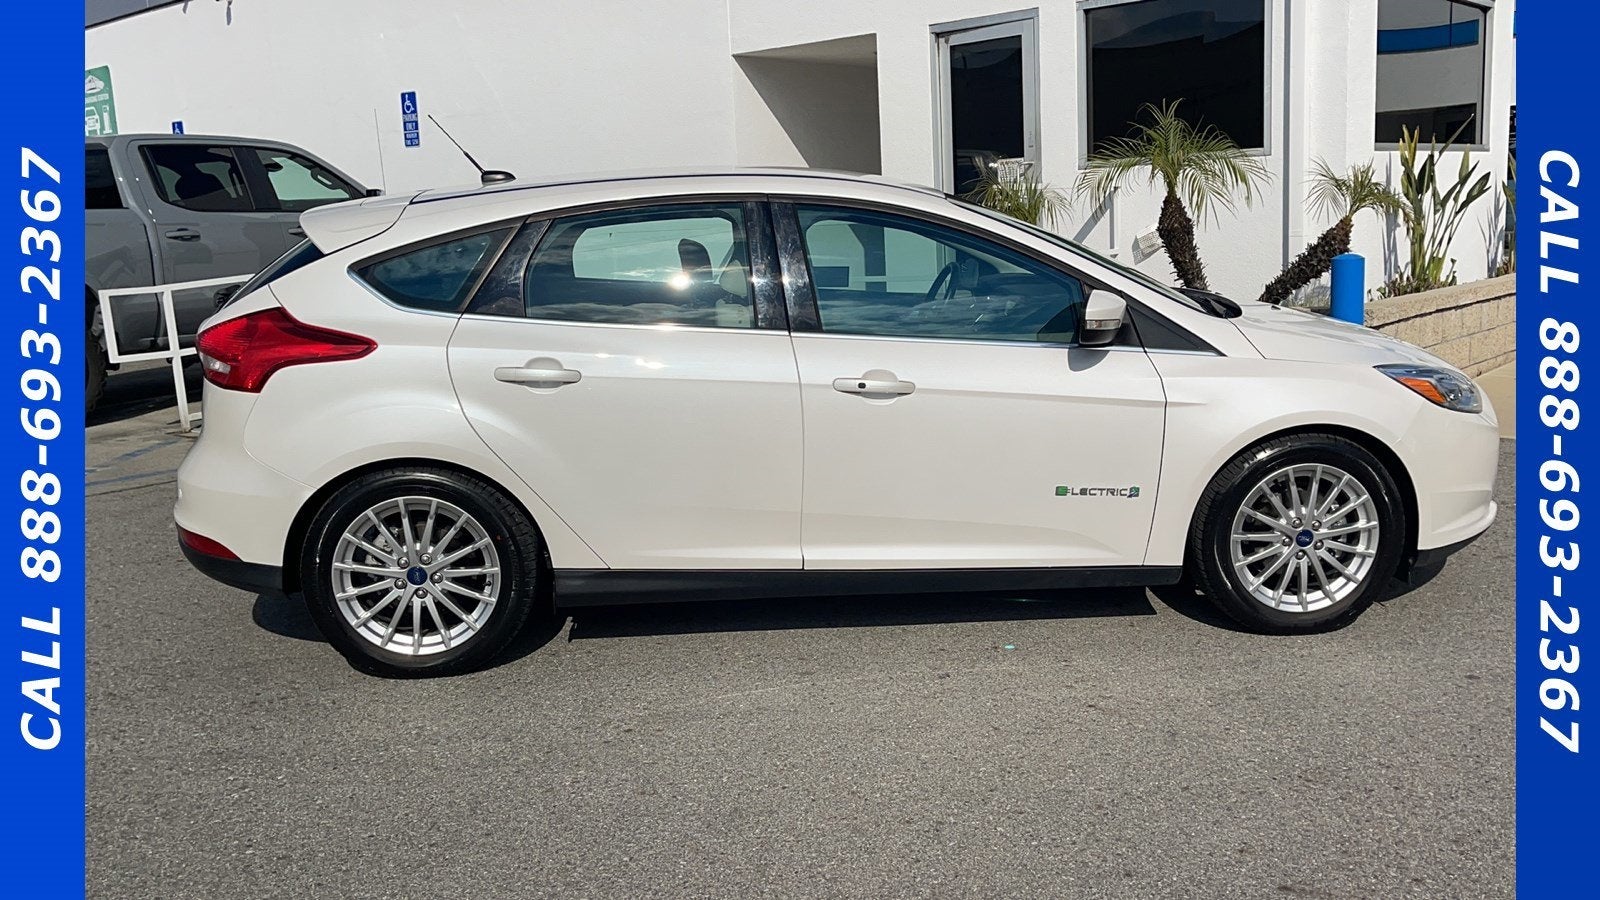 Used 2015 Ford Focus Electric with VIN 1FADP3R46FL231955 for sale in Upland, CA